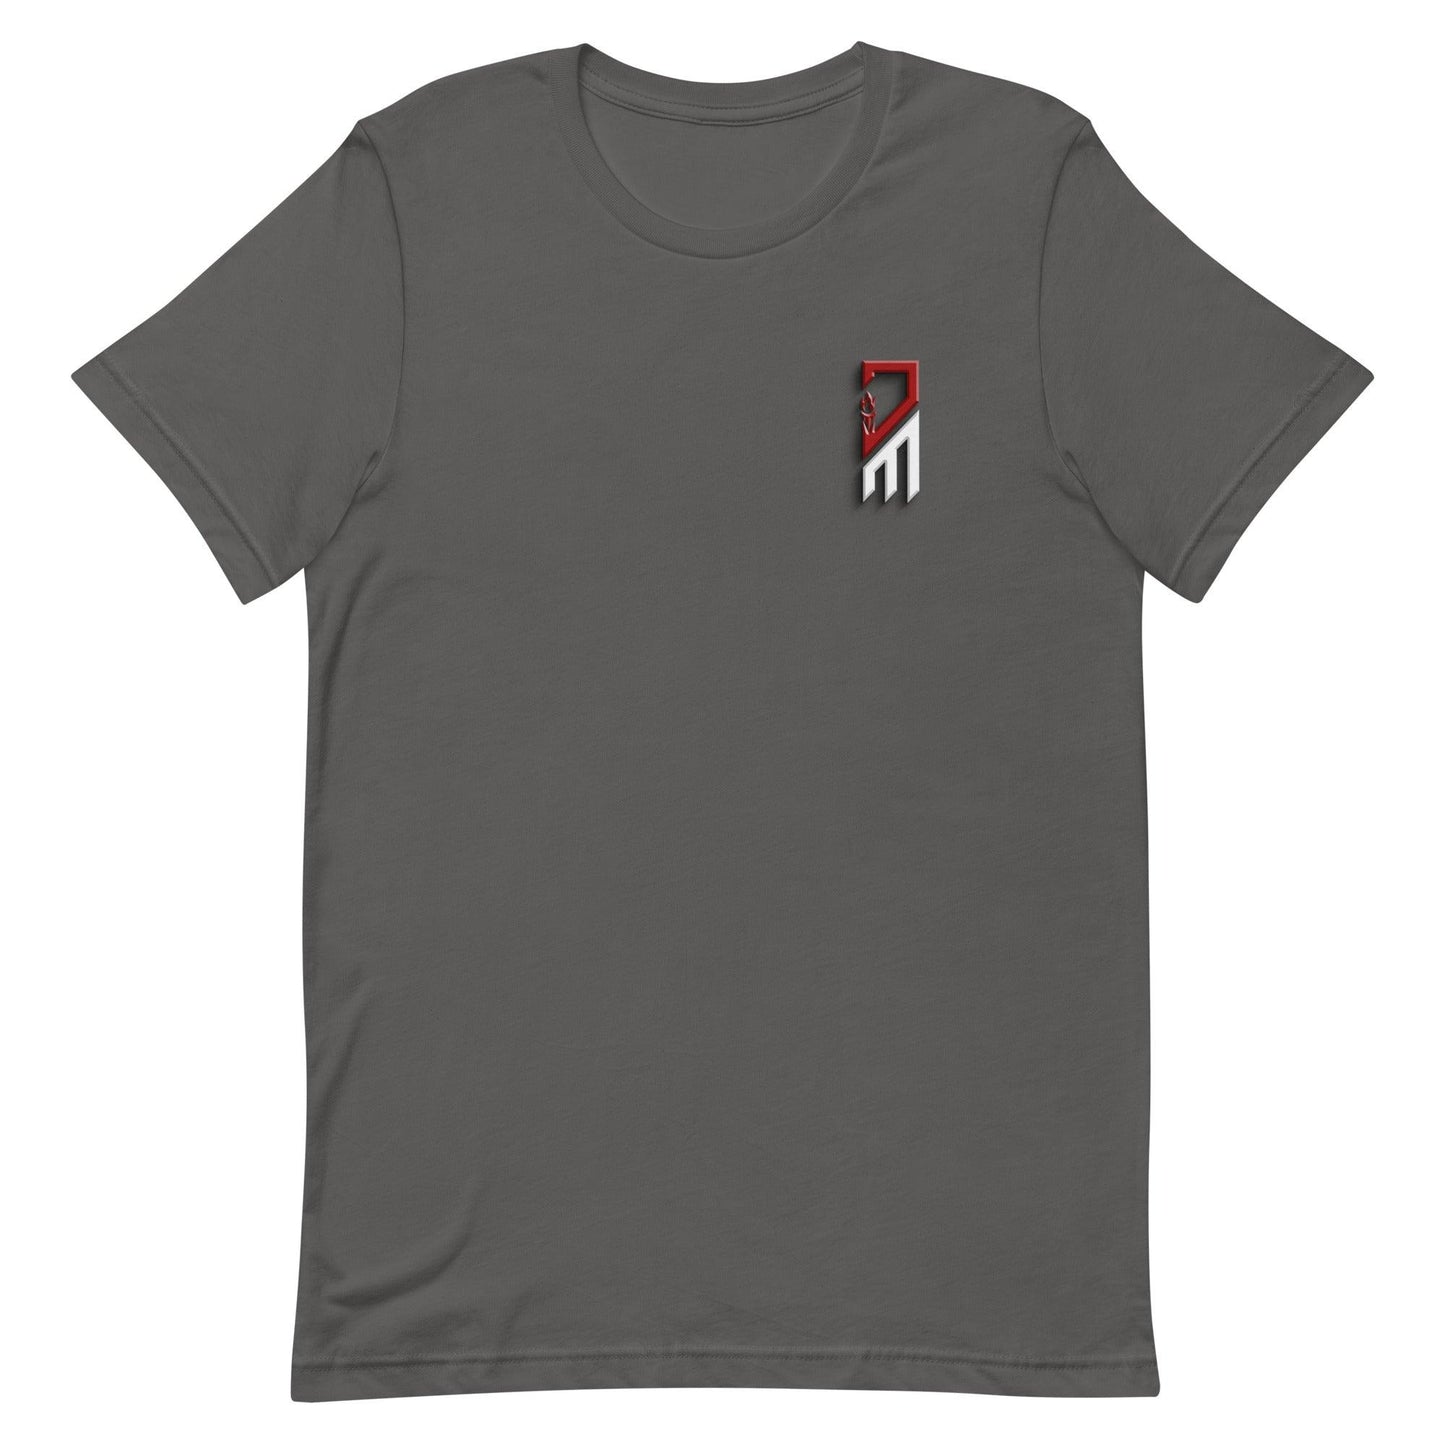 Jarvis Moss "Essential" t-shirt - Fan Arch